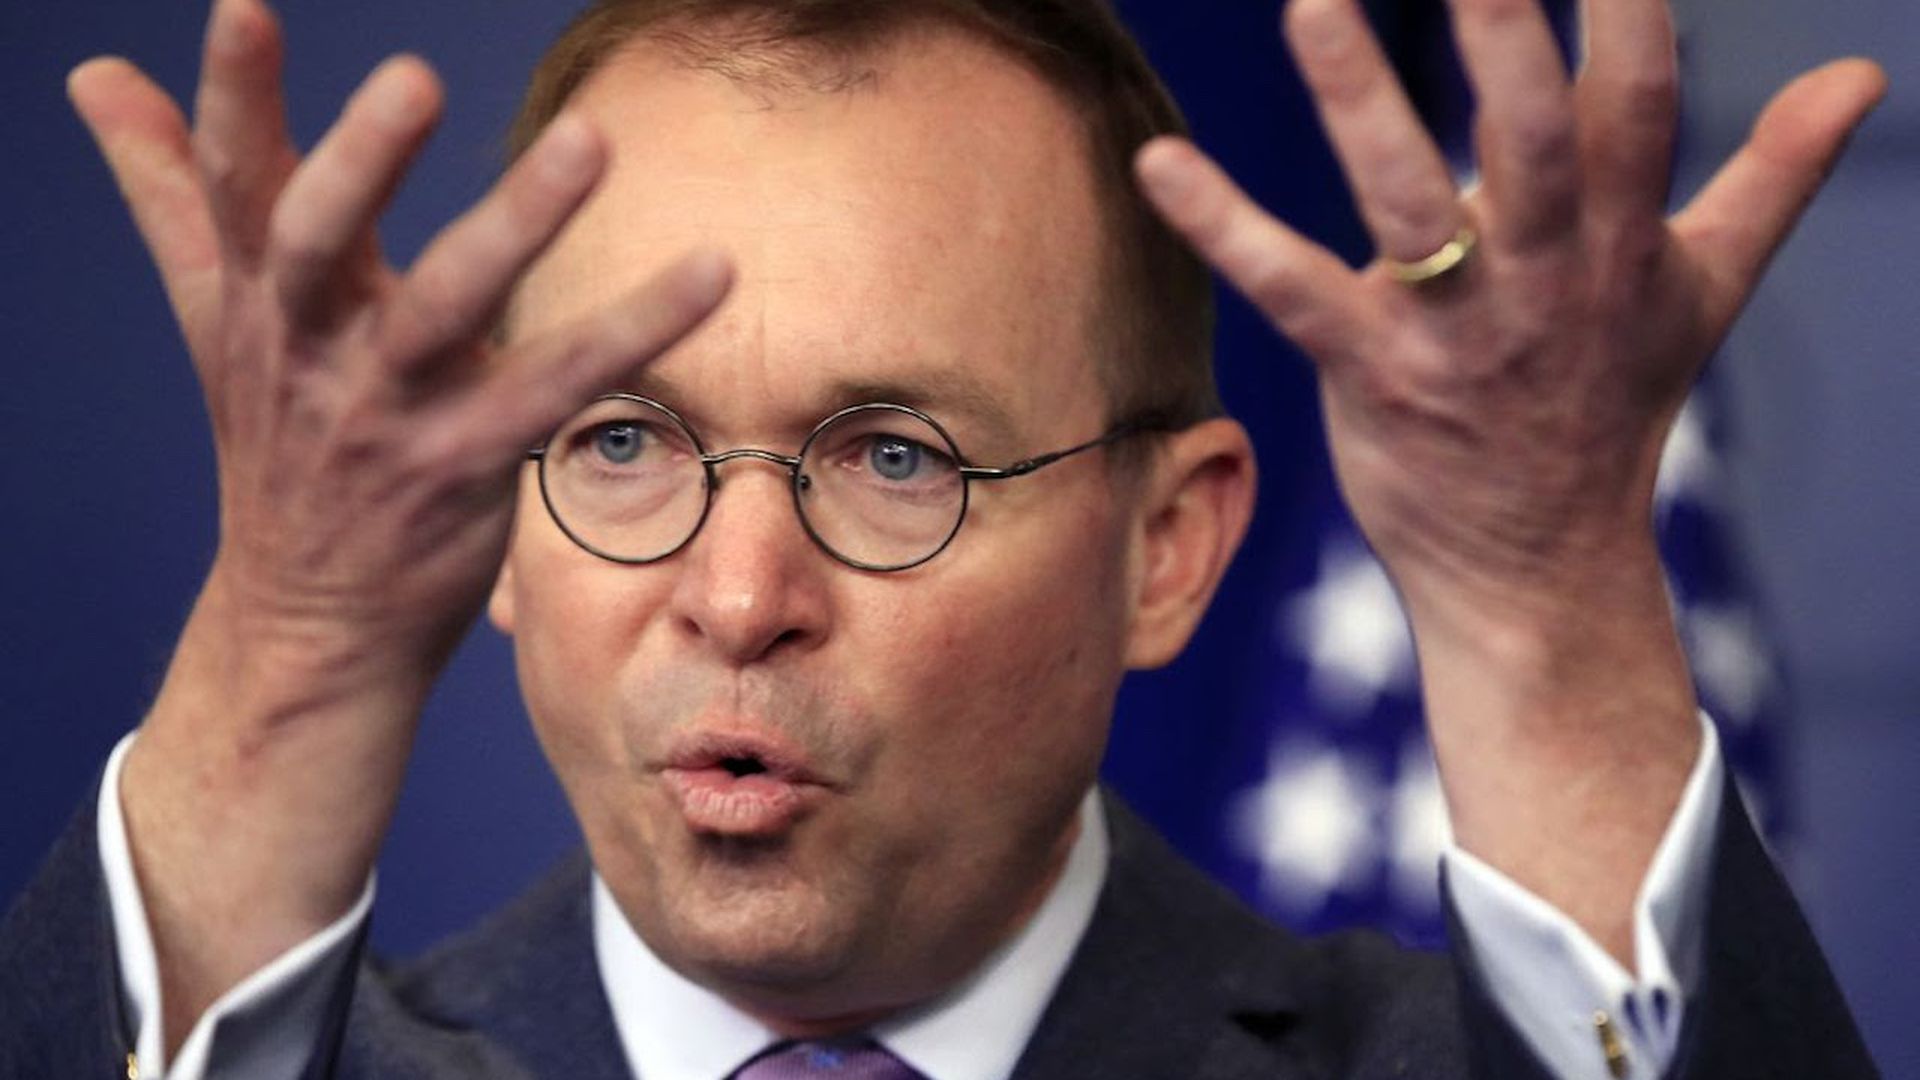 Mick Mulvaney with his hands raised in front of his face.